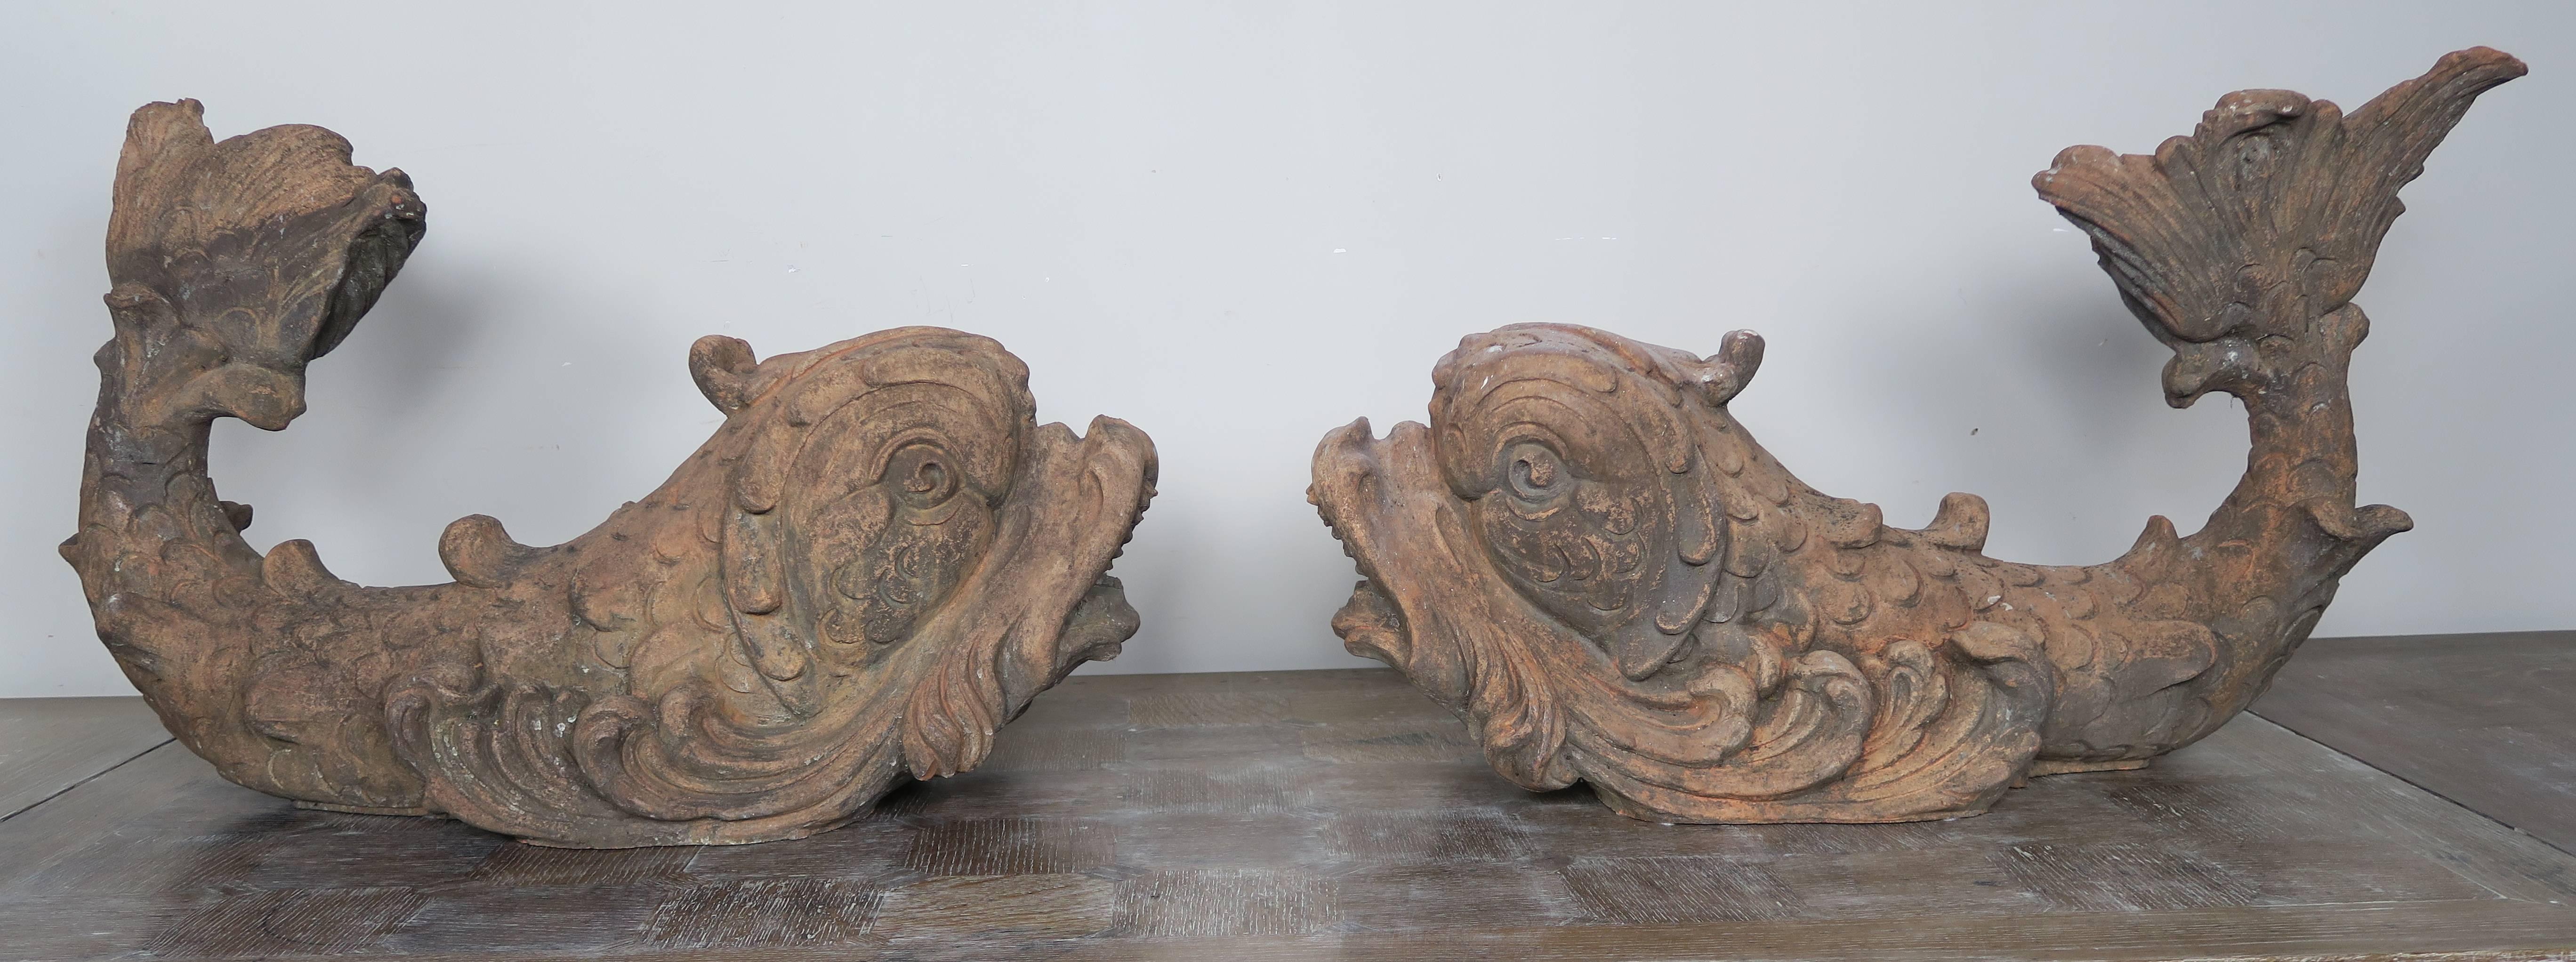 Pair of early 20th century Italian Monumental terra cotta dolphin fountains. Manufacturers stamp on bottom. Old repair on tail.